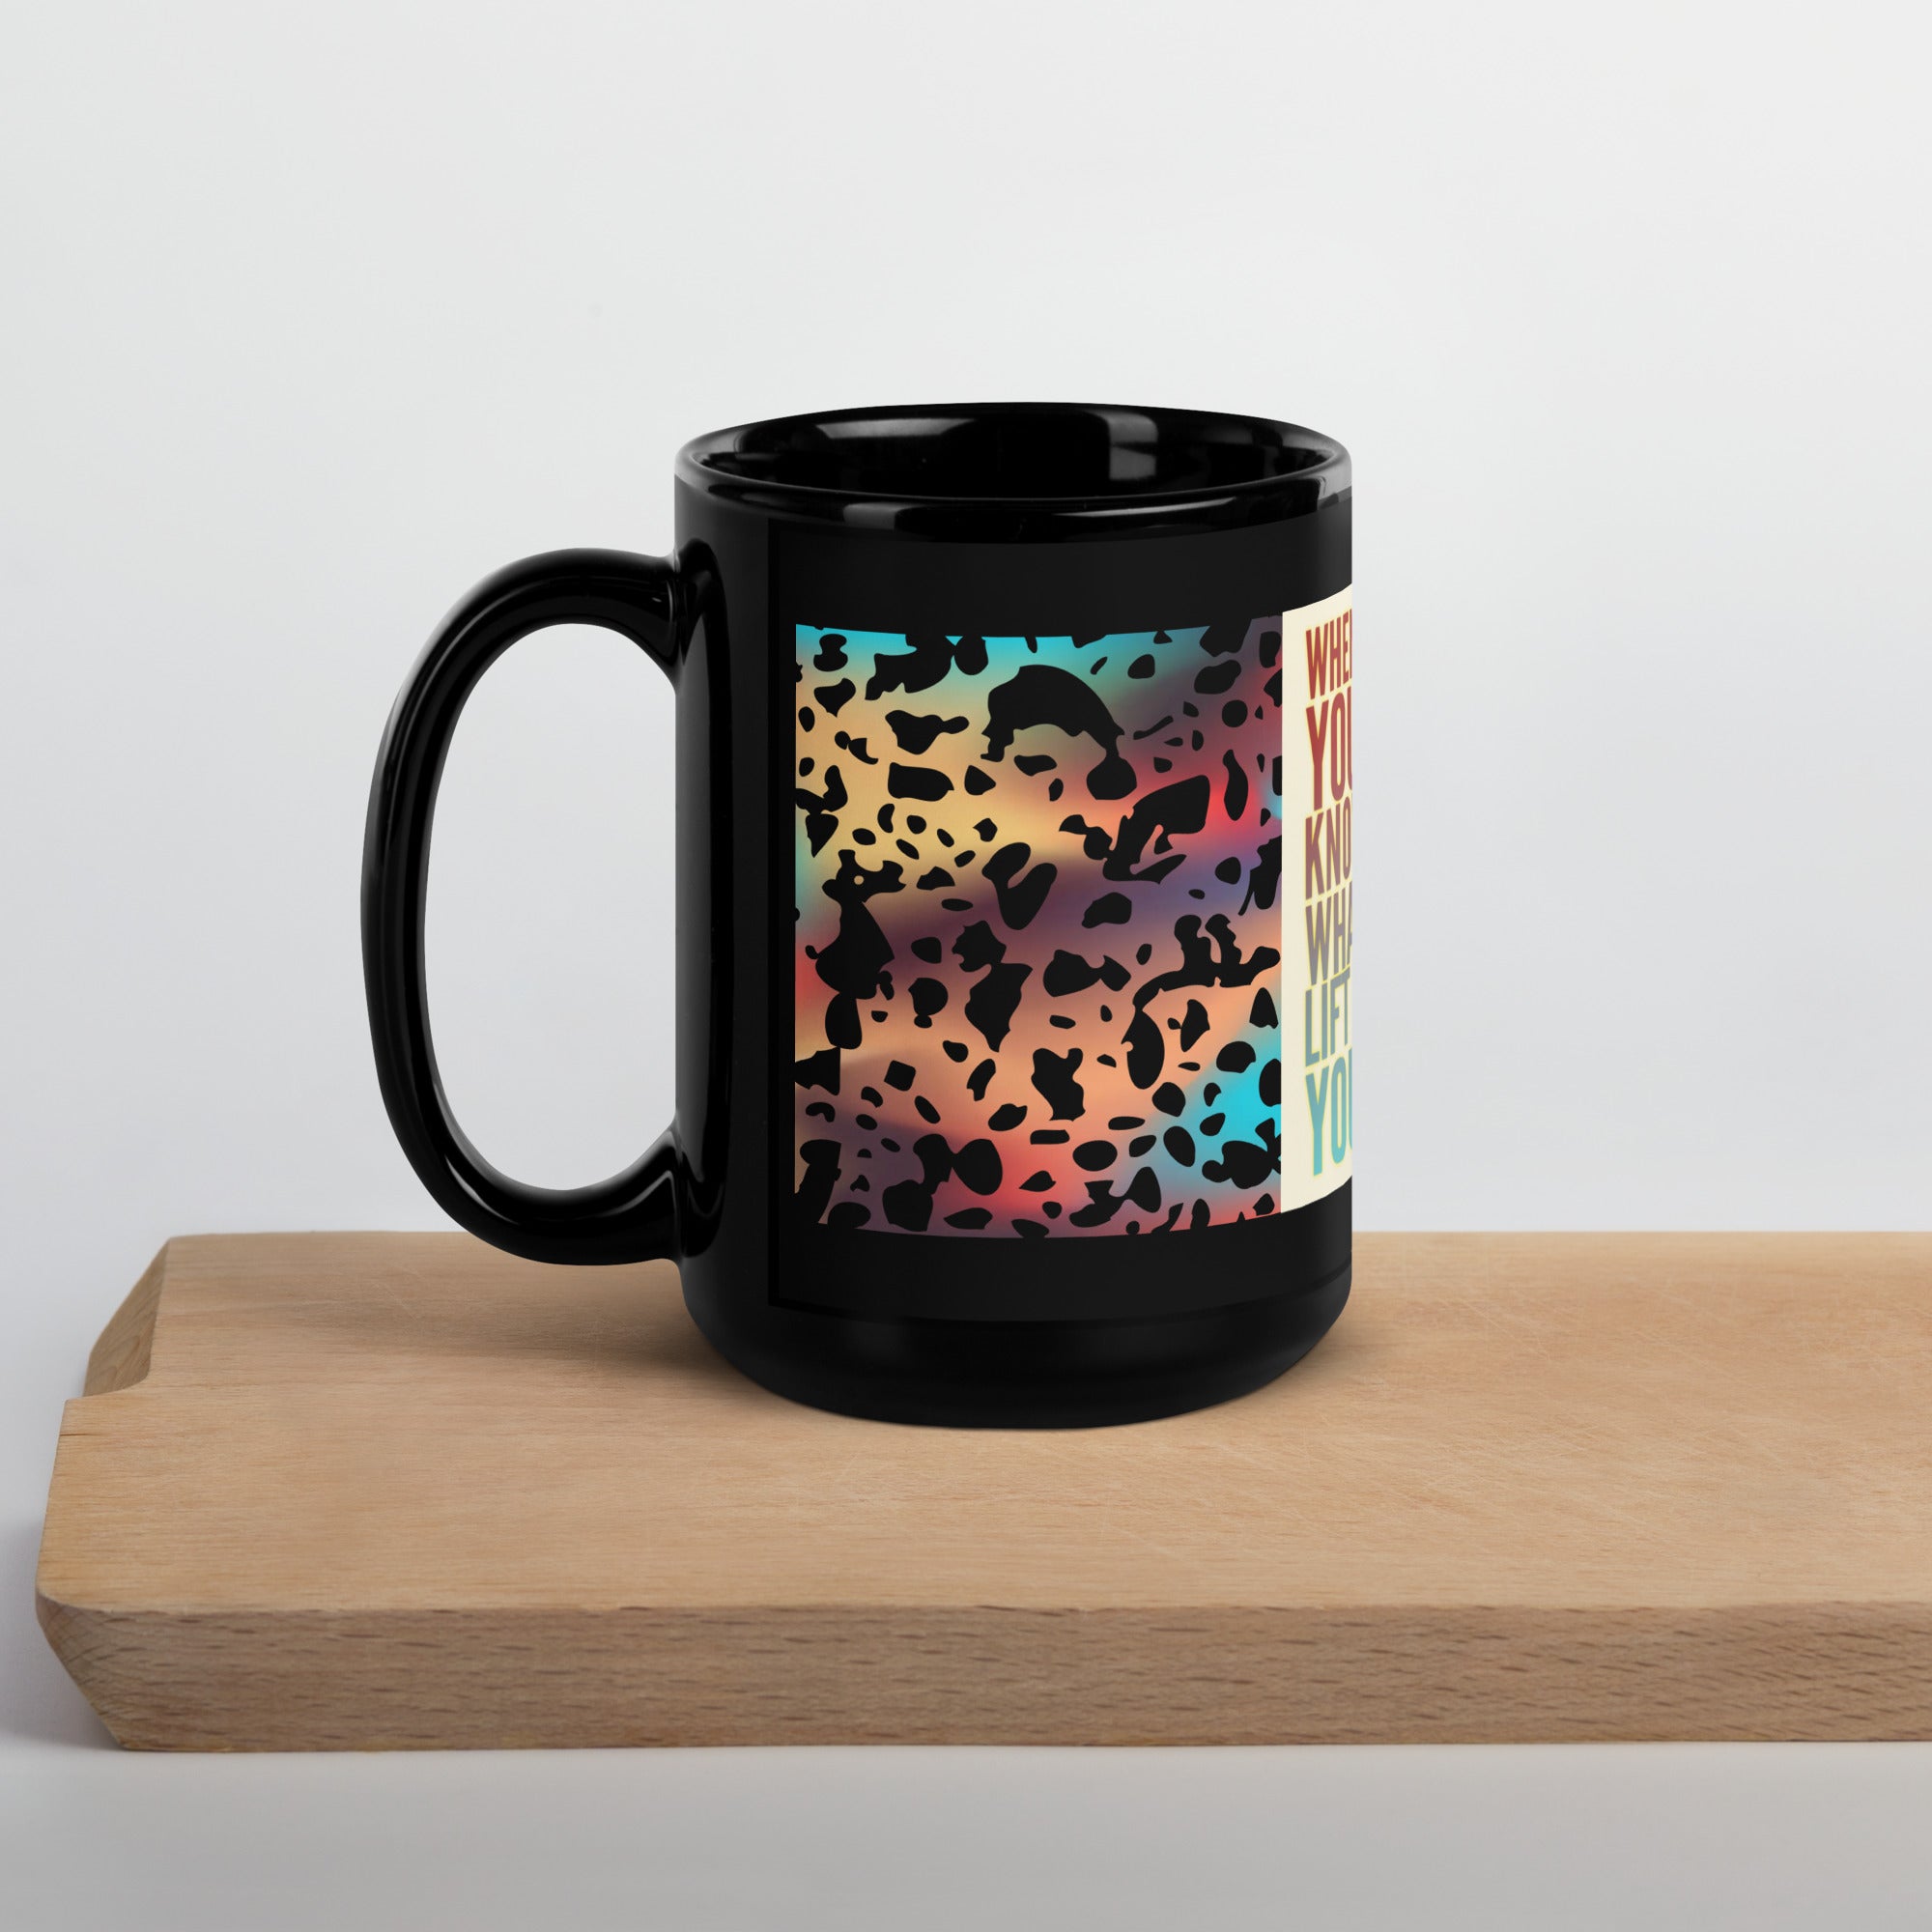 GloWell Designs - Black Glossy Mug - Motivational Quote - Lift Up Your Eyes - GloWell Designs